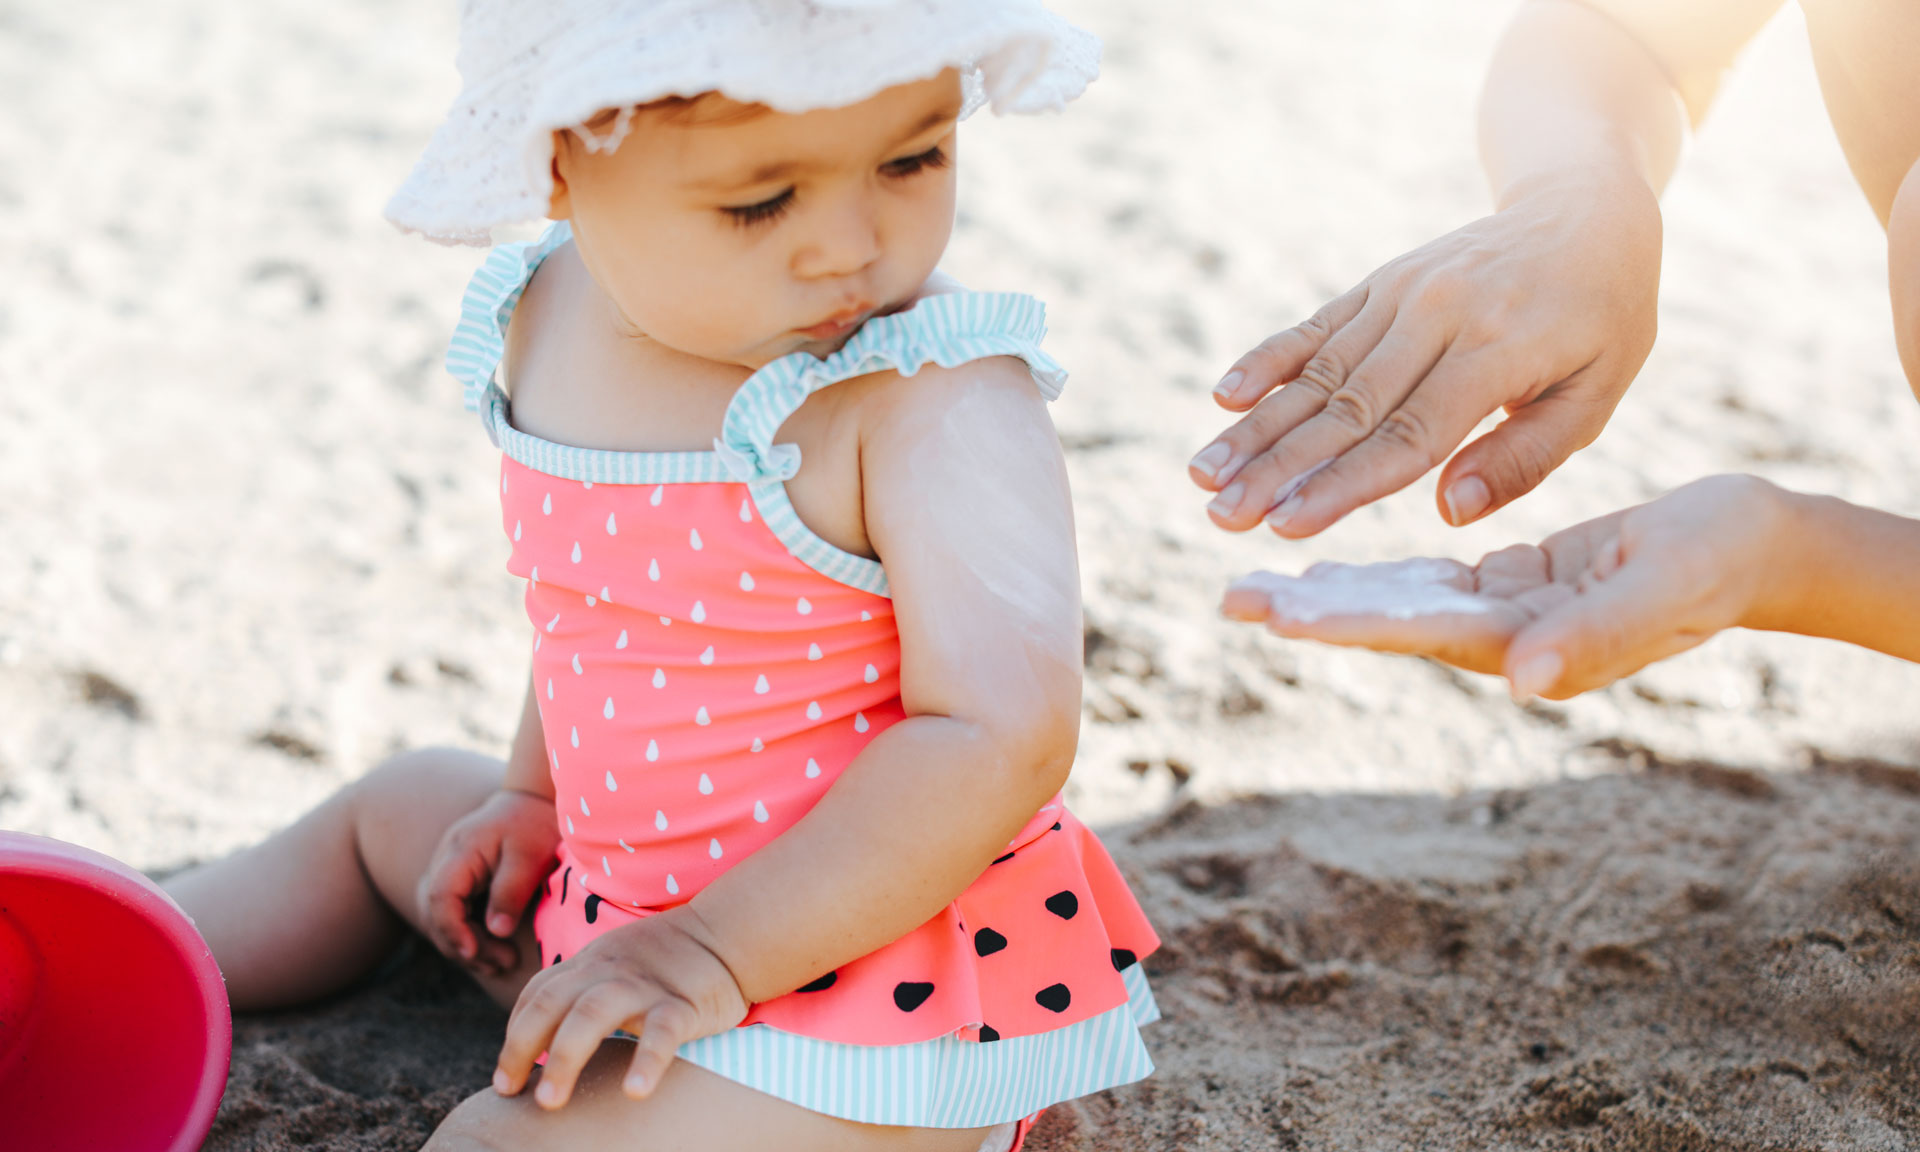 11 summer safety hazards every parent needs to know about